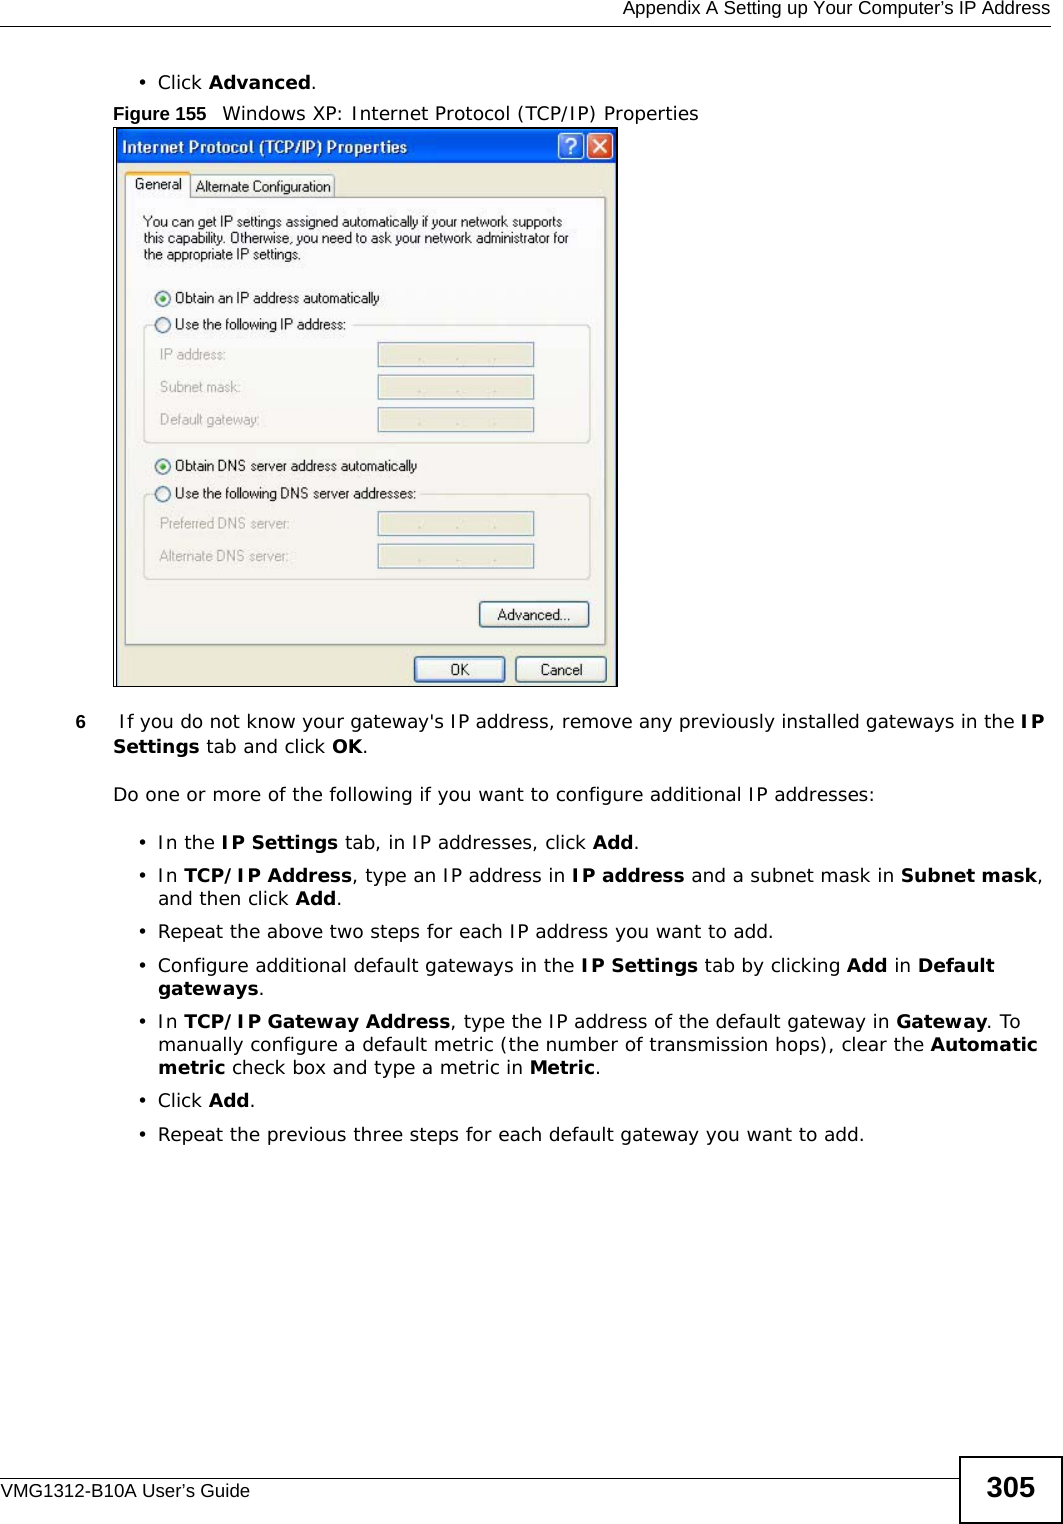  Appendix A Setting up Your Computer’s IP AddressVMG1312-B10A User’s Guide 305• Click Advanced.Figure 155   Windows XP: Internet Protocol (TCP/IP) Properties6 If you do not know your gateway&apos;s IP address, remove any previously installed gateways in the IP Settings tab and click OK.Do one or more of the following if you want to configure additional IP addresses:•In the IP Settings tab, in IP addresses, click Add.•In TCP/IP Address, type an IP address in IP address and a subnet mask in Subnet mask, and then click Add.• Repeat the above two steps for each IP address you want to add.• Configure additional default gateways in the IP Settings tab by clicking Add in Default gateways.•In TCP/IP Gateway Address, type the IP address of the default gateway in Gateway. To manually configure a default metric (the number of transmission hops), clear the Automatic metric check box and type a metric in Metric.• Click Add. • Repeat the previous three steps for each default gateway you want to add.